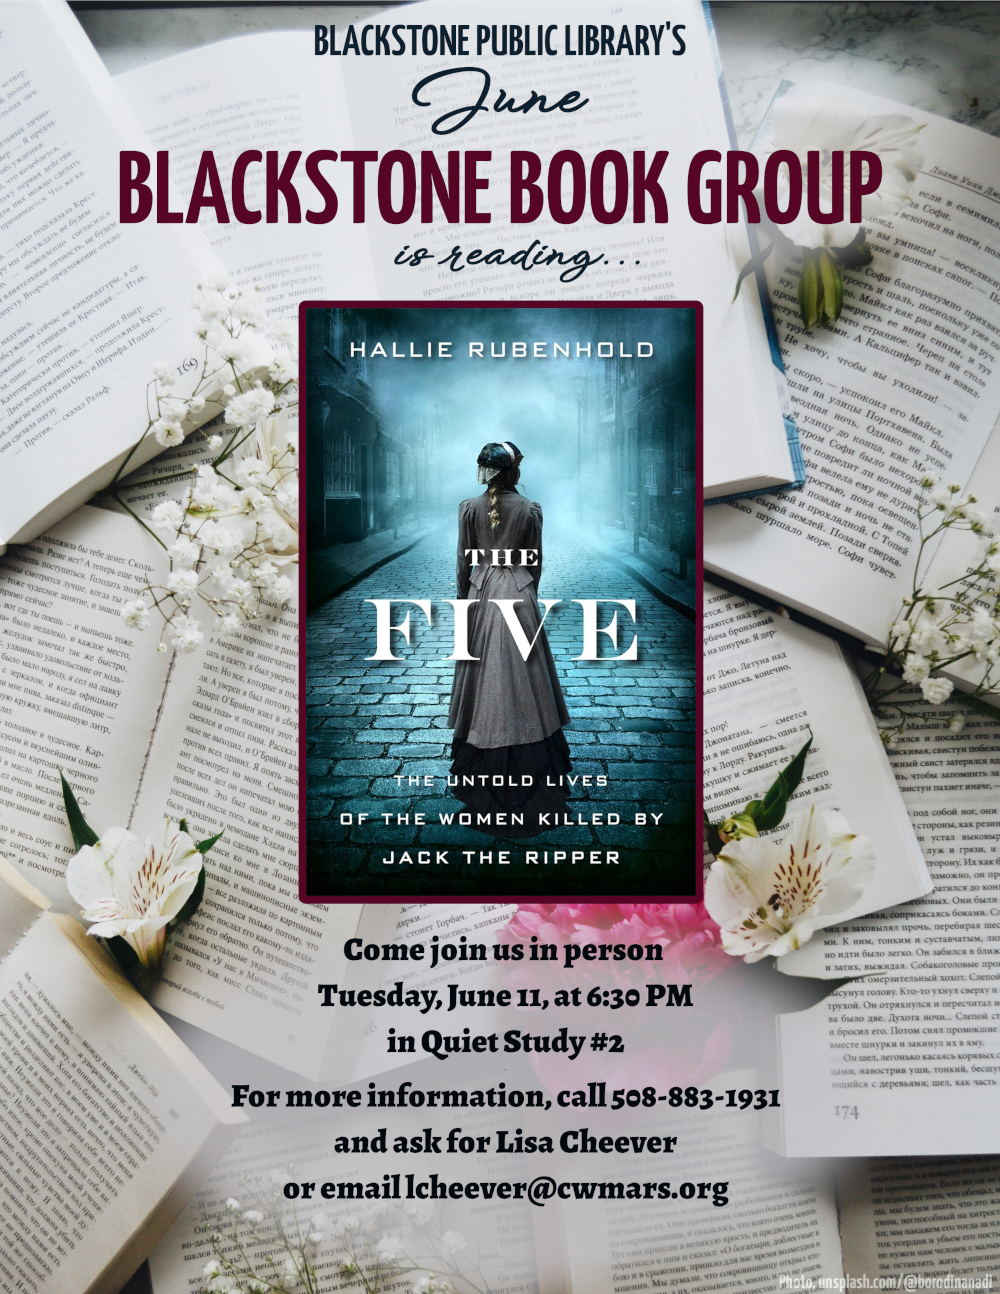 Blackstone Public Library’s June Blackstone Book Group is reading "The Five: The Untold Lives of the Women Killed by Jack the Ripper" by Hallie Rubenhold.  Come join us in person Tuesday, June 11, at 6:30 PM in Quiet Study #2.   For more information, call 508-883-1931 and ask for Lisa Cheever or email lcheever@cwmars.org.  Image description: Cover of the book features a woman standing with her back to the viewer, wearing a Victorian style grey-brown overcoat. Before her is a dark brick street with brick buildings on either side, with everything except the woman in blue-grey tones and shrouded in mist. 